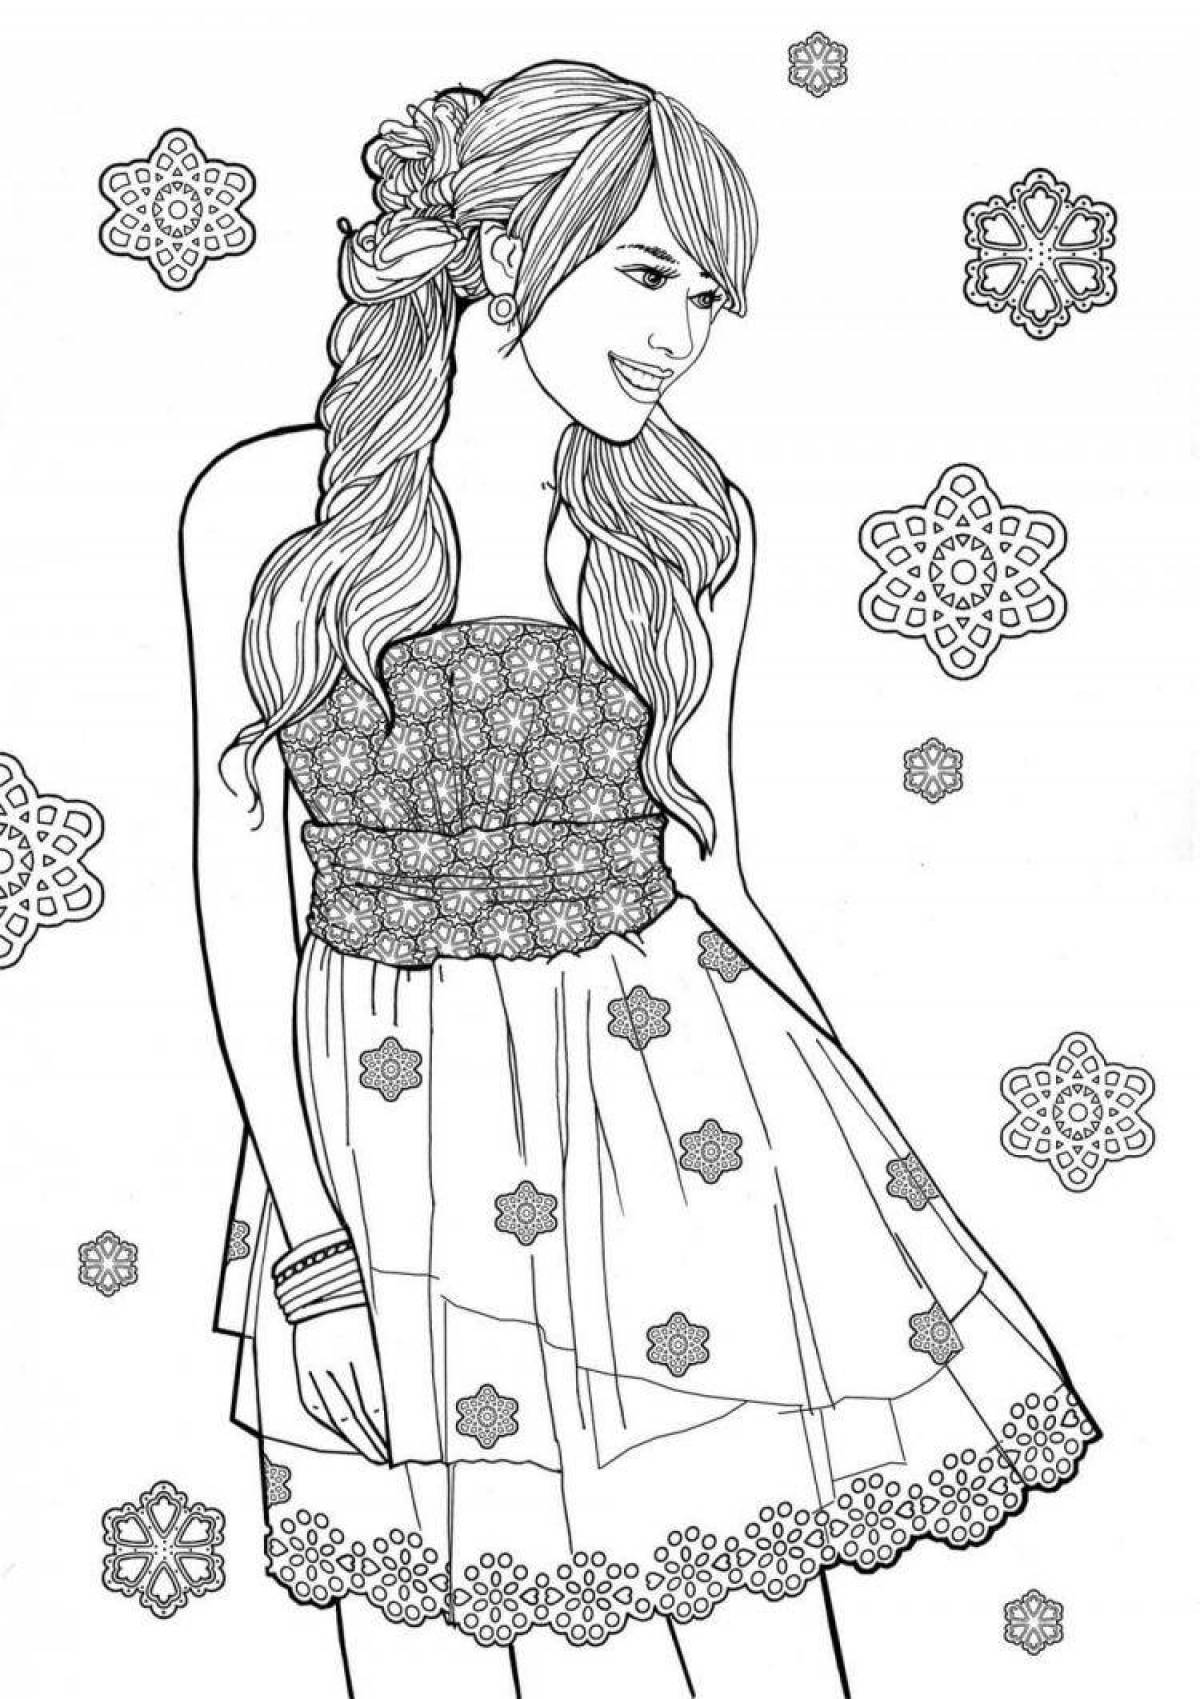 Cute people coloring for girls